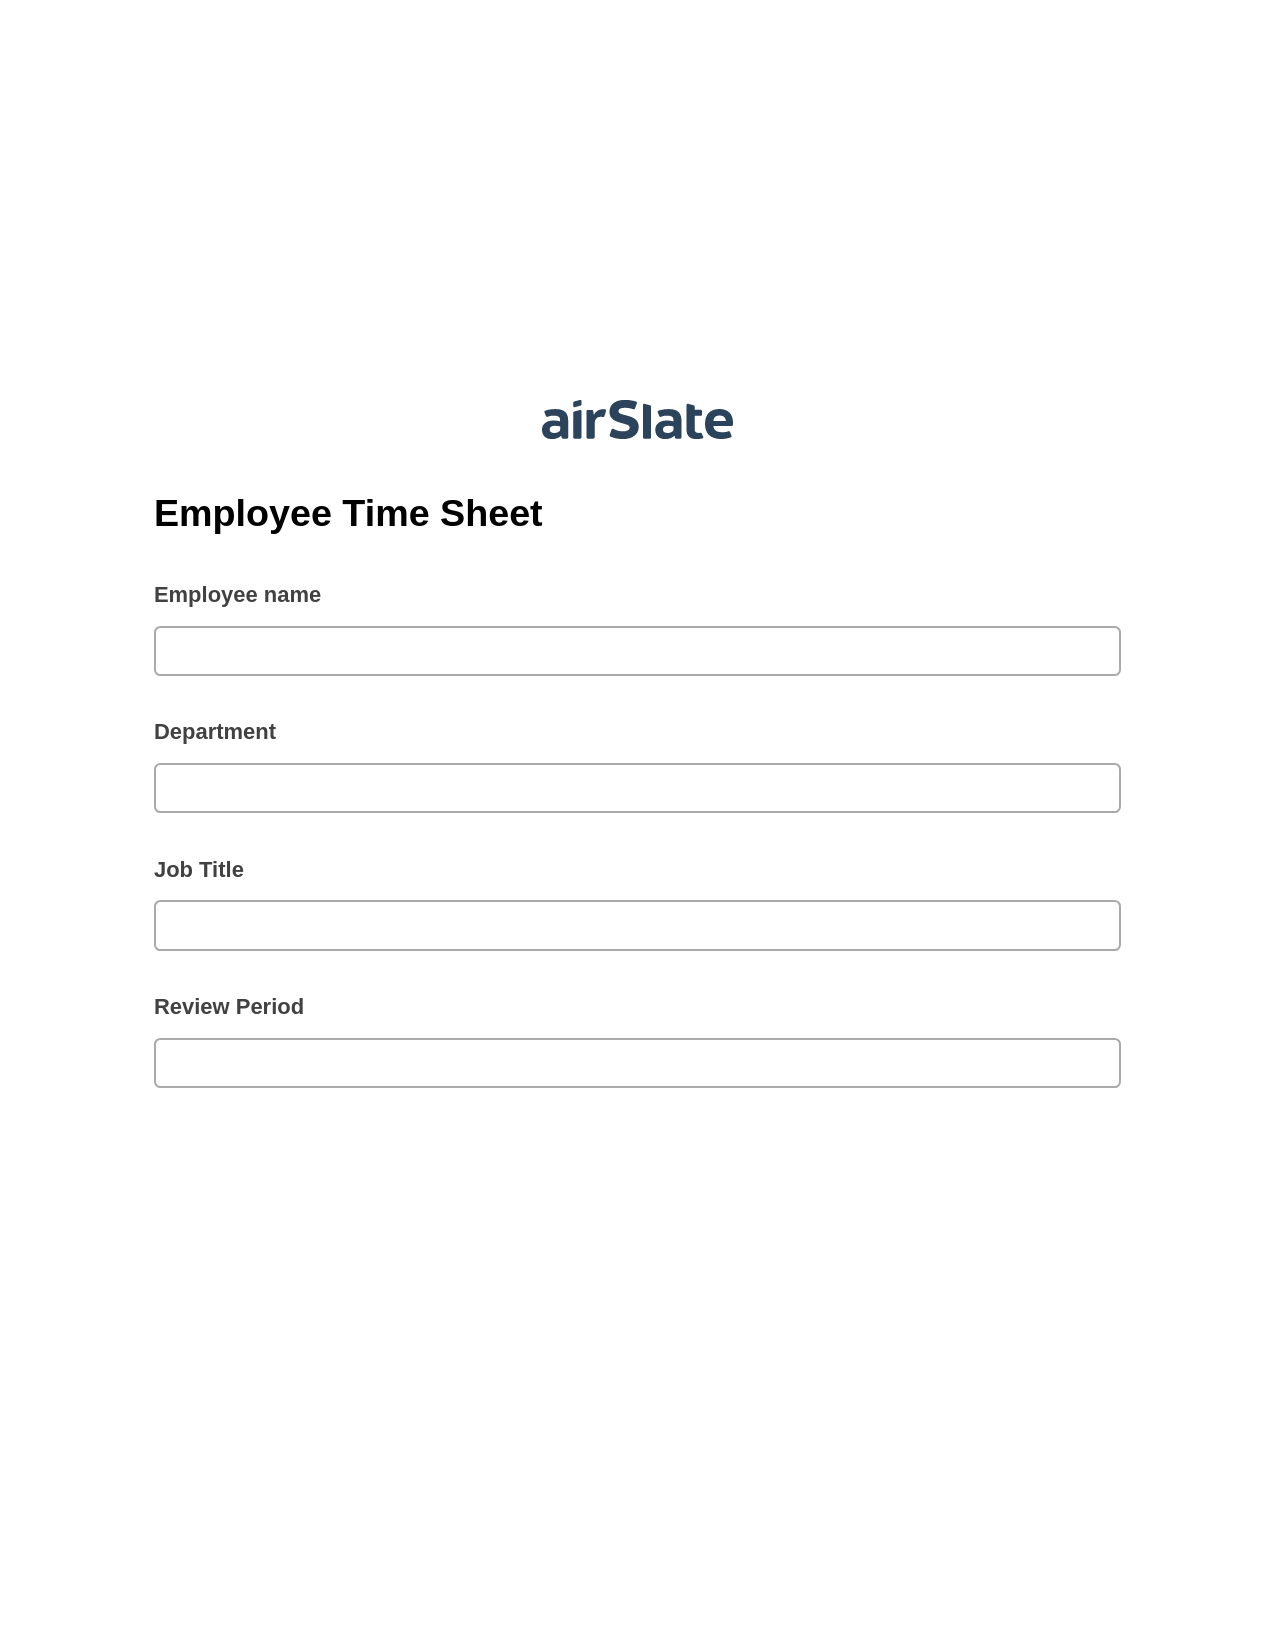 Multirole Employee Time Sheet Pre-fill from Salesforce Records Bot, Create slate addon, Archive to OneDrive Bot